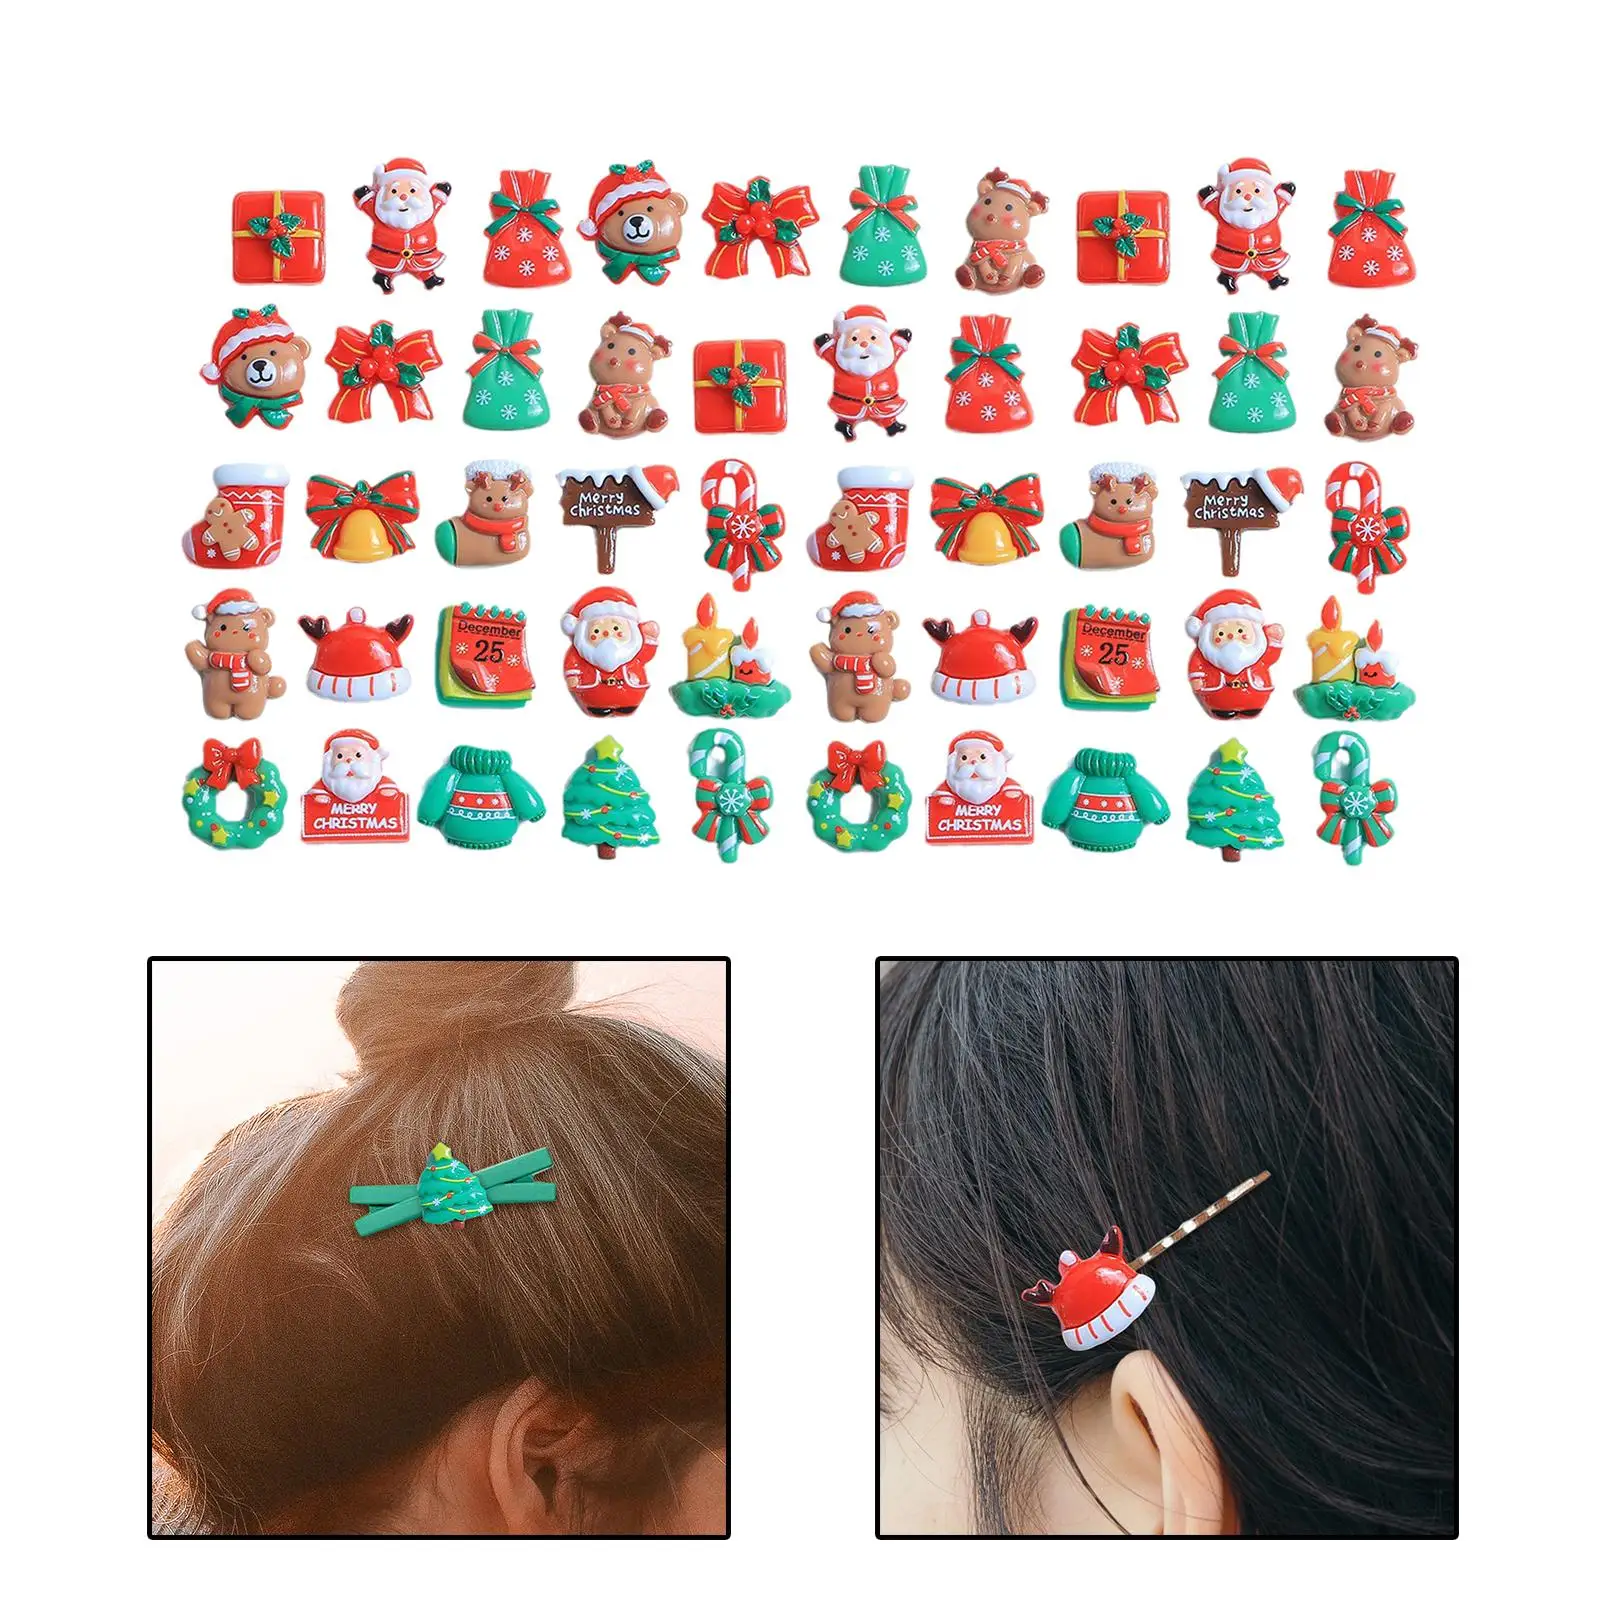 50 Pieces Christmas Flatback Embellishments, Colorful Christmas Resin Charms for Crafts Lovely Miniature Ornament